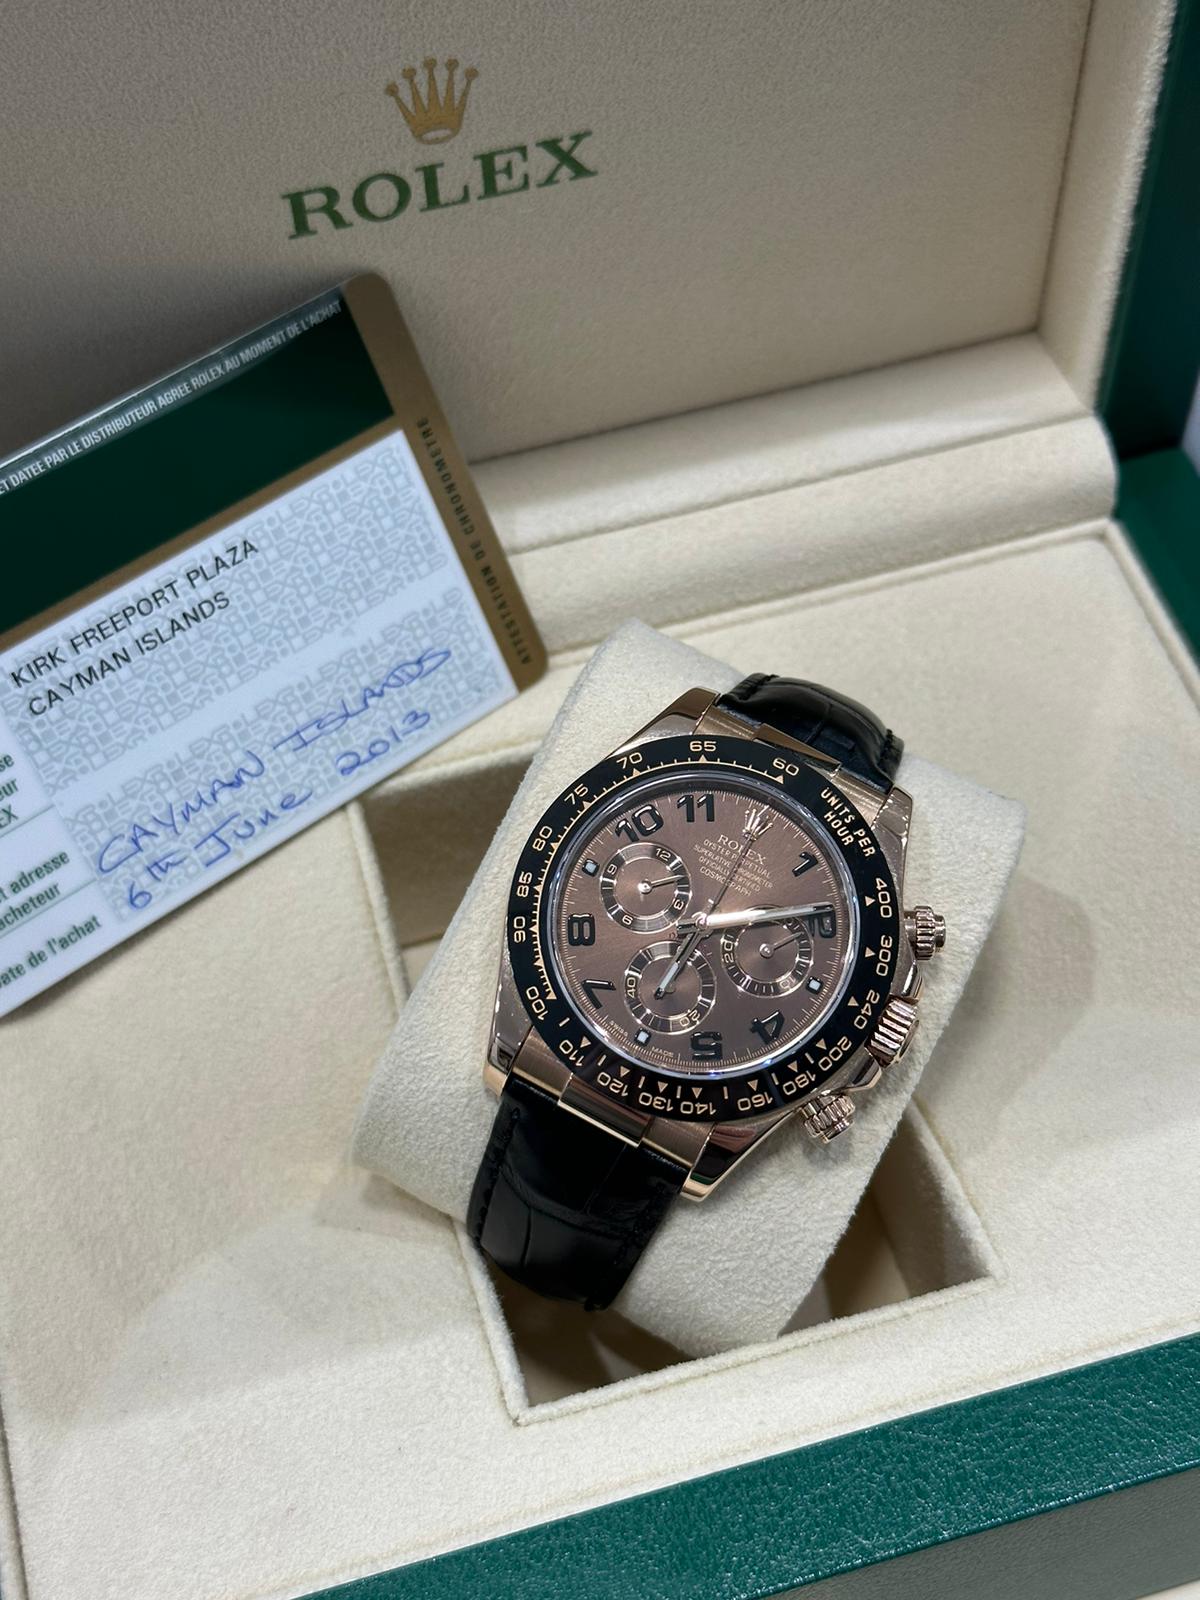 Rolex Daytona Chocolate with Leather bracelet 116515LN 2013 with box and papers. - Image 7 of 8